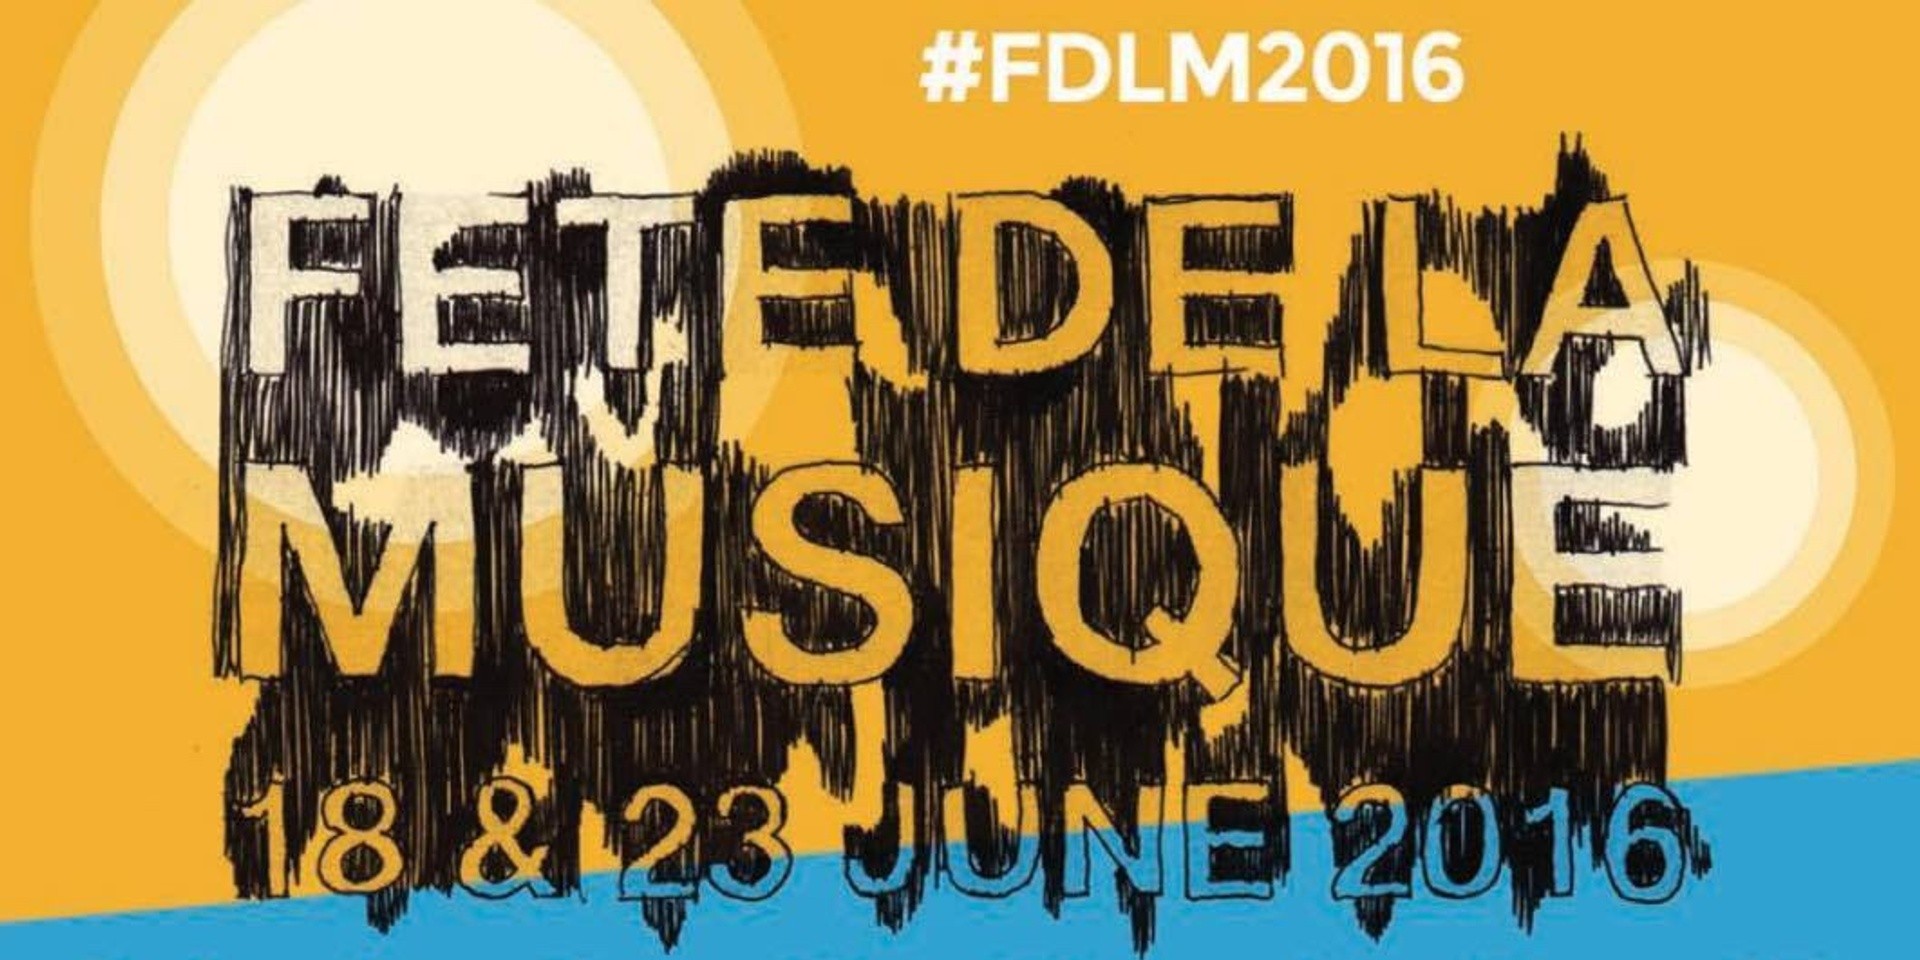  Fête de la Musique 2016 celebrates 22 years of music, art and community in the Philippines